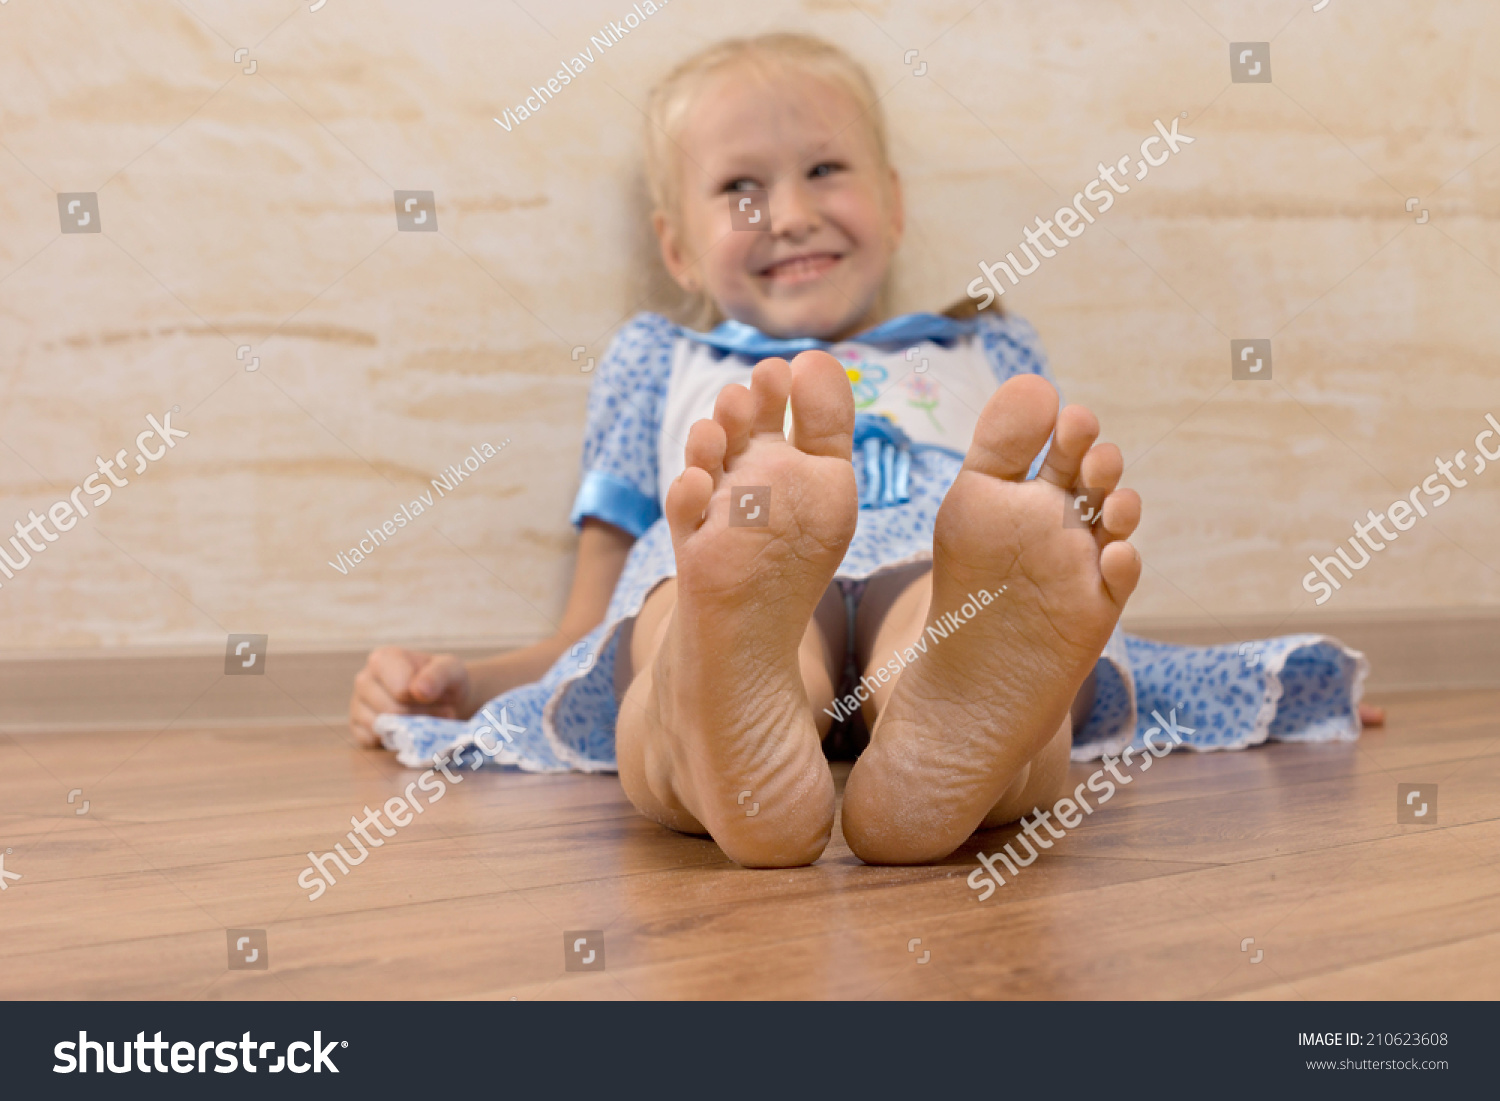 Smiling Young Girl Showing Feet On Foto Stok 210623608 Shutterstock